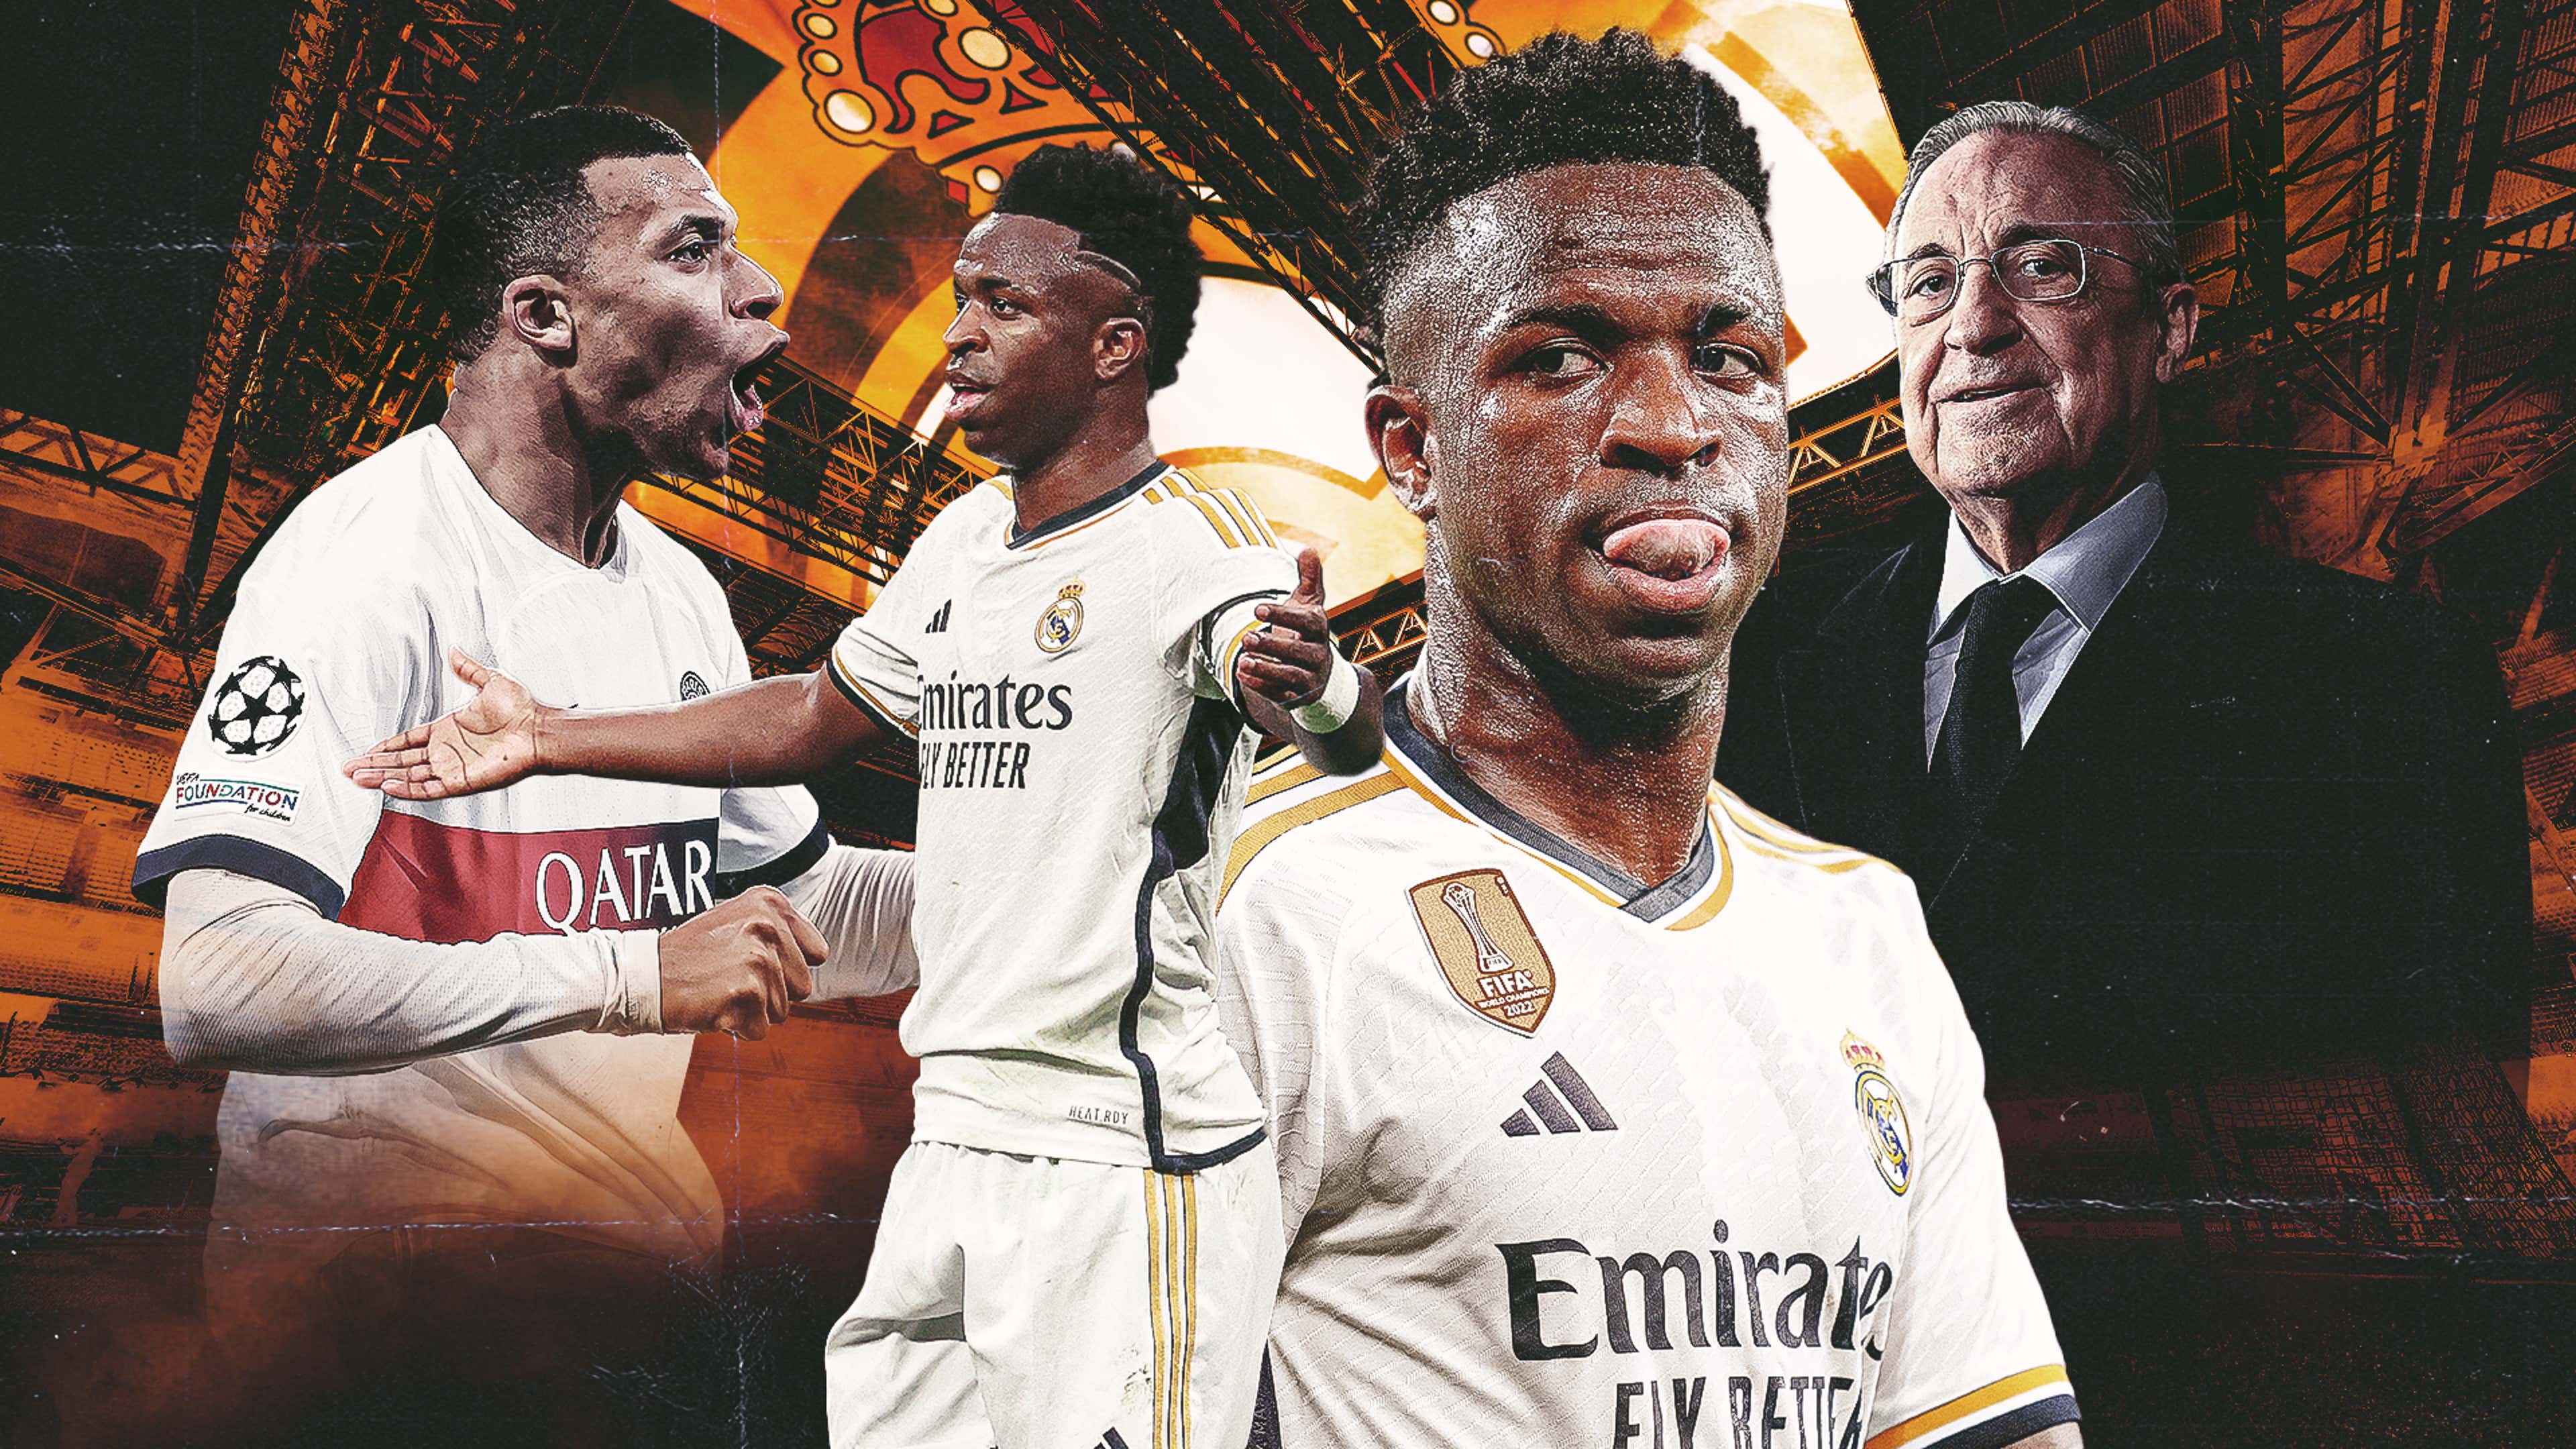 Underappreciated Vinicius Jr should consider leaving Real Madrid after  being treated like a disposable asset in the Kylian Mbappe soap opera